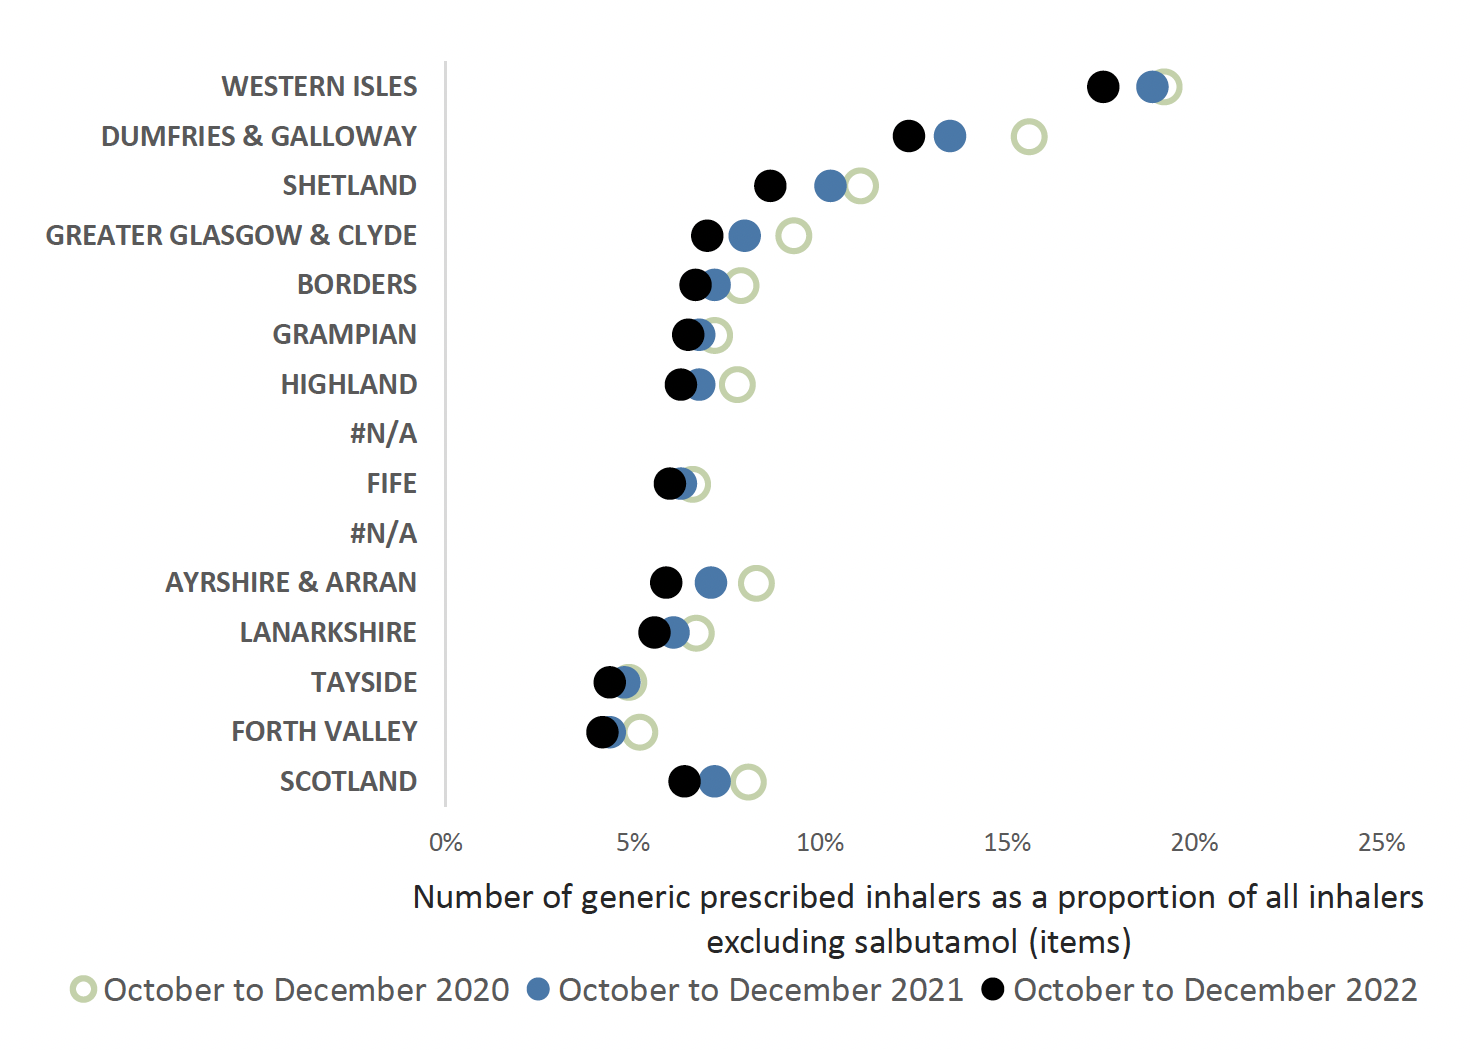 Chart showing variance of generically prescribed inhalers across all health boards and Scotland from 2020 to 2022. Overall Scotland trend is decreasing